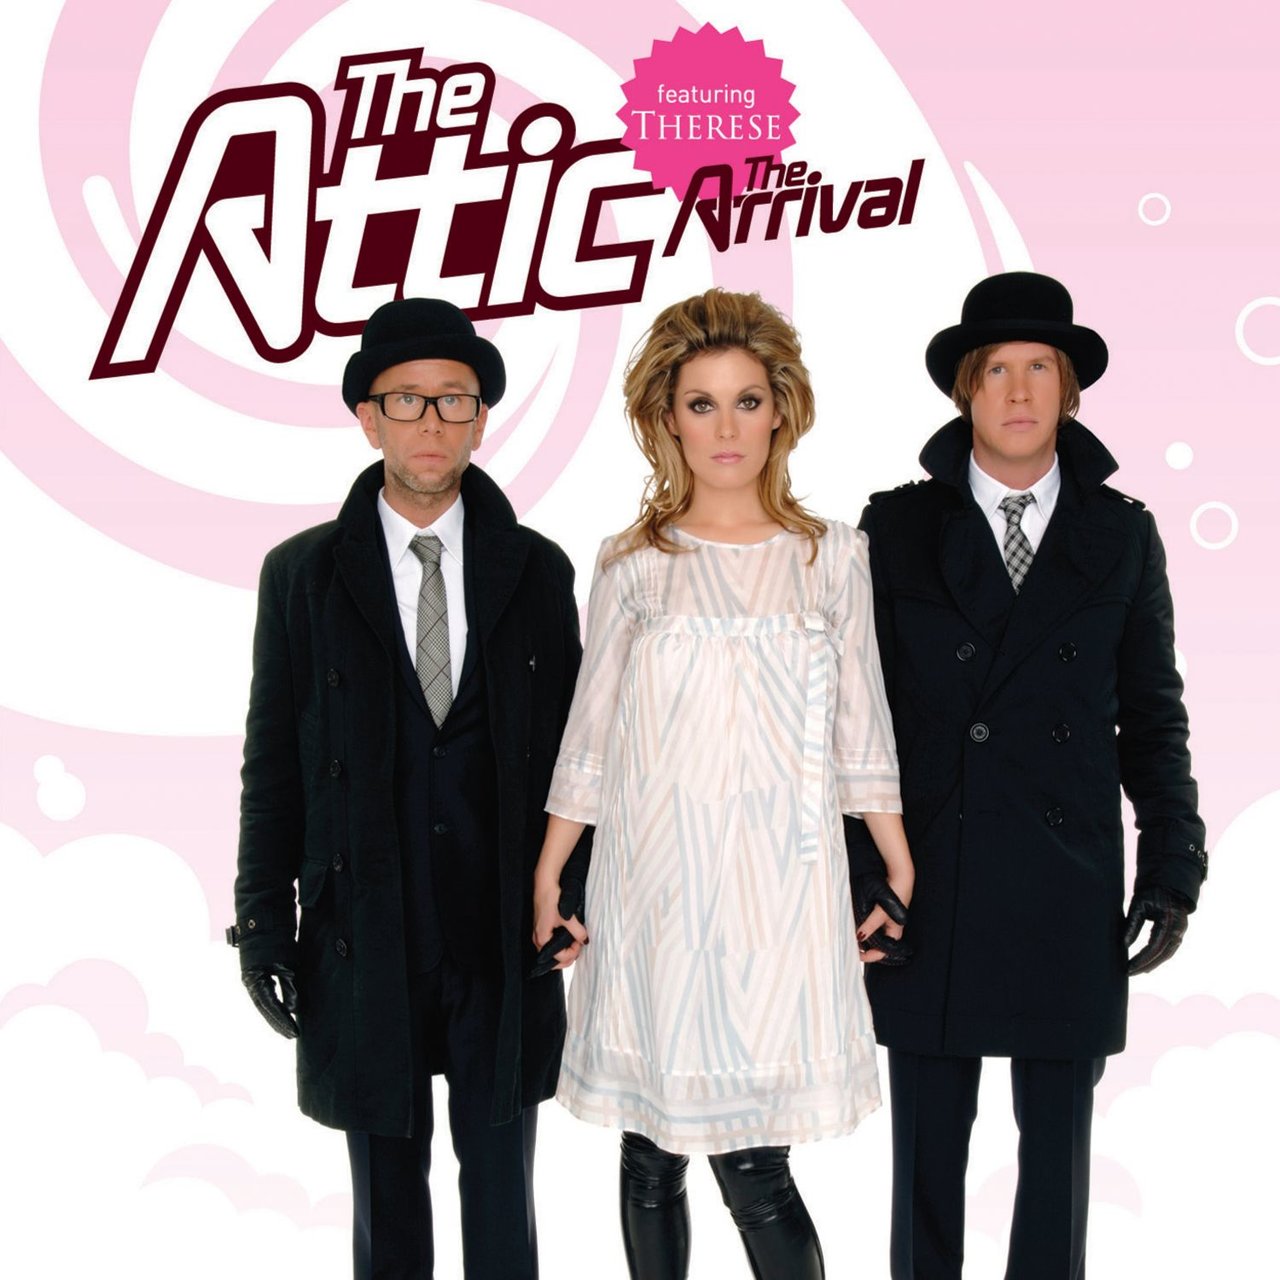 The Attic ft. featuring Therese The Arrival cover artwork